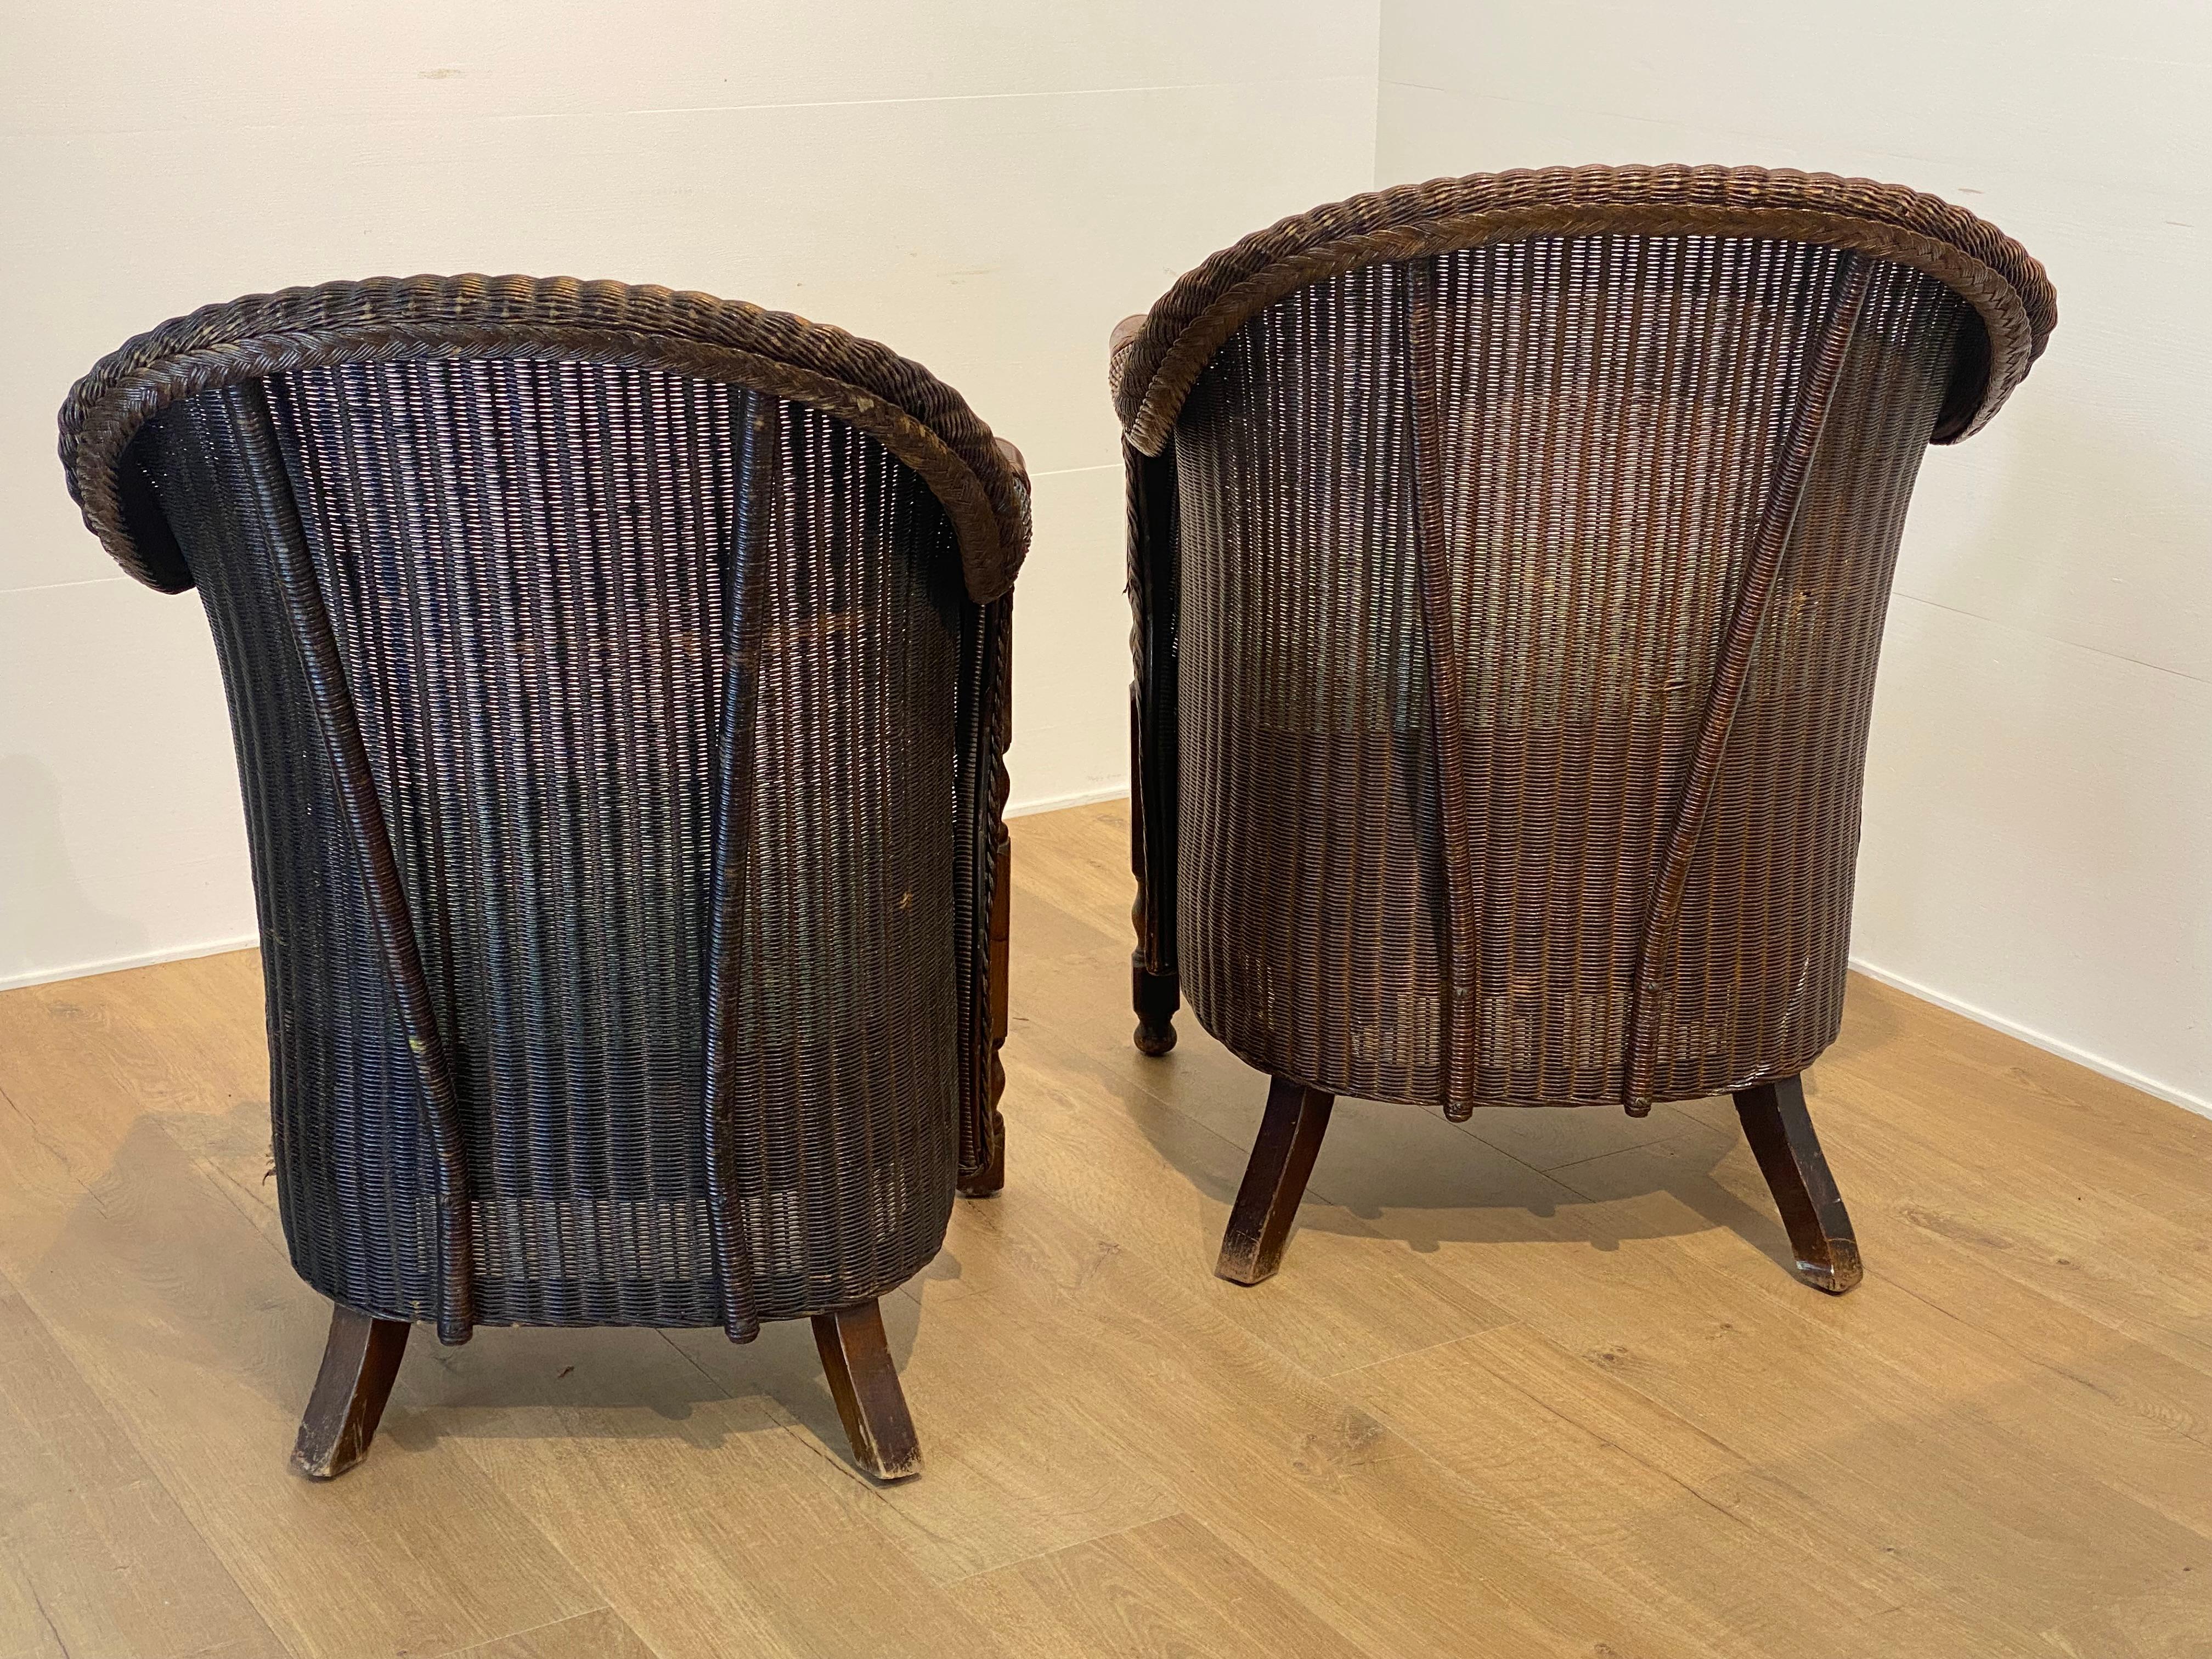 Pair of antique Loyd Loom Chairs In Rattan For Sale 13